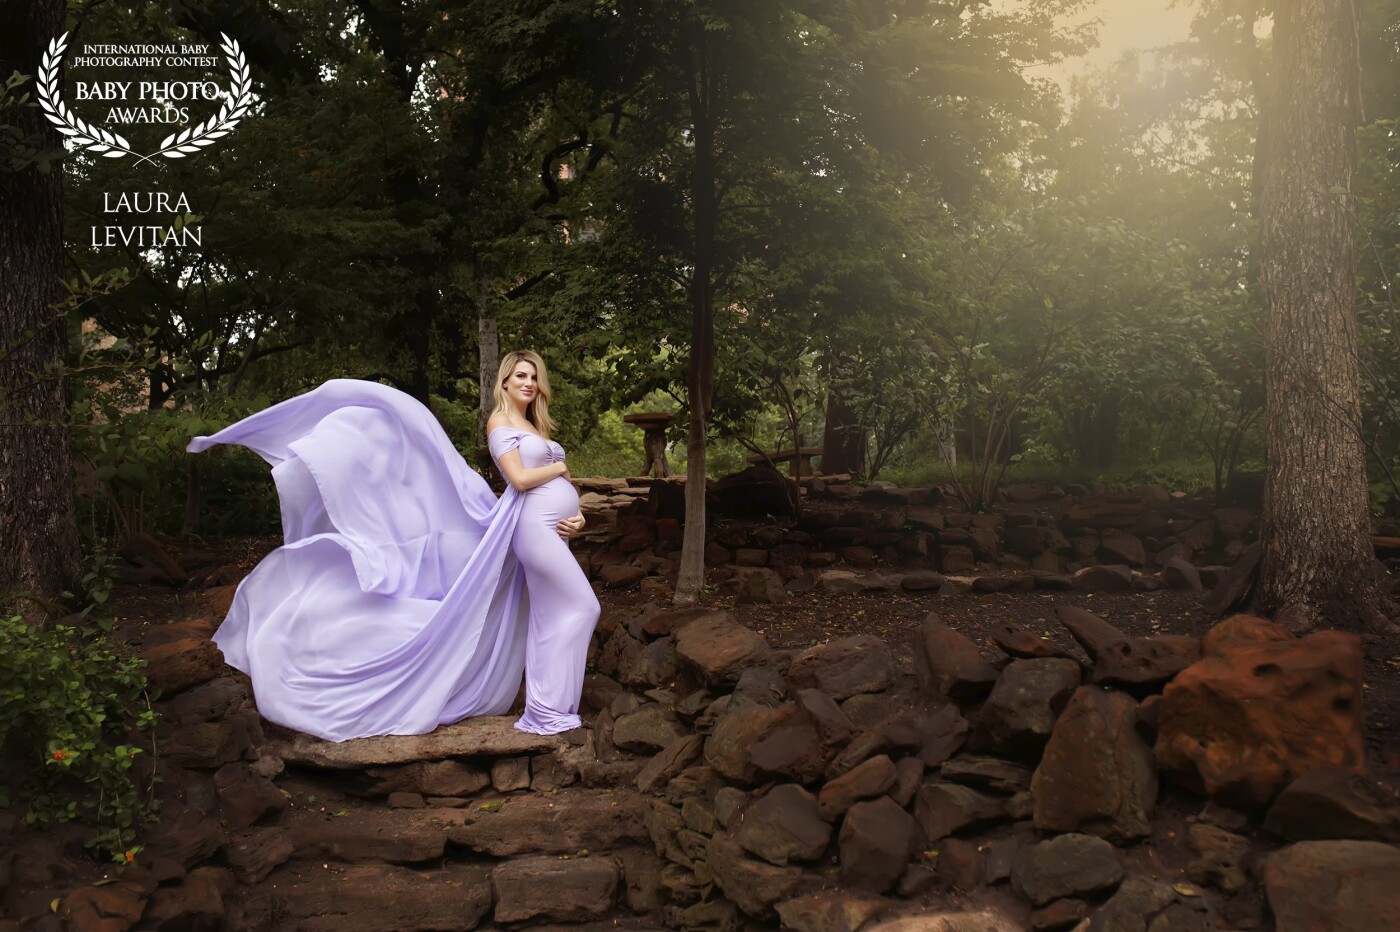 This gorgeous mama was hoping for a magical backdrop to her portrait session. I love filling my work with fantasy, romance, and color. I hope you enjoy it as much as I did create it.